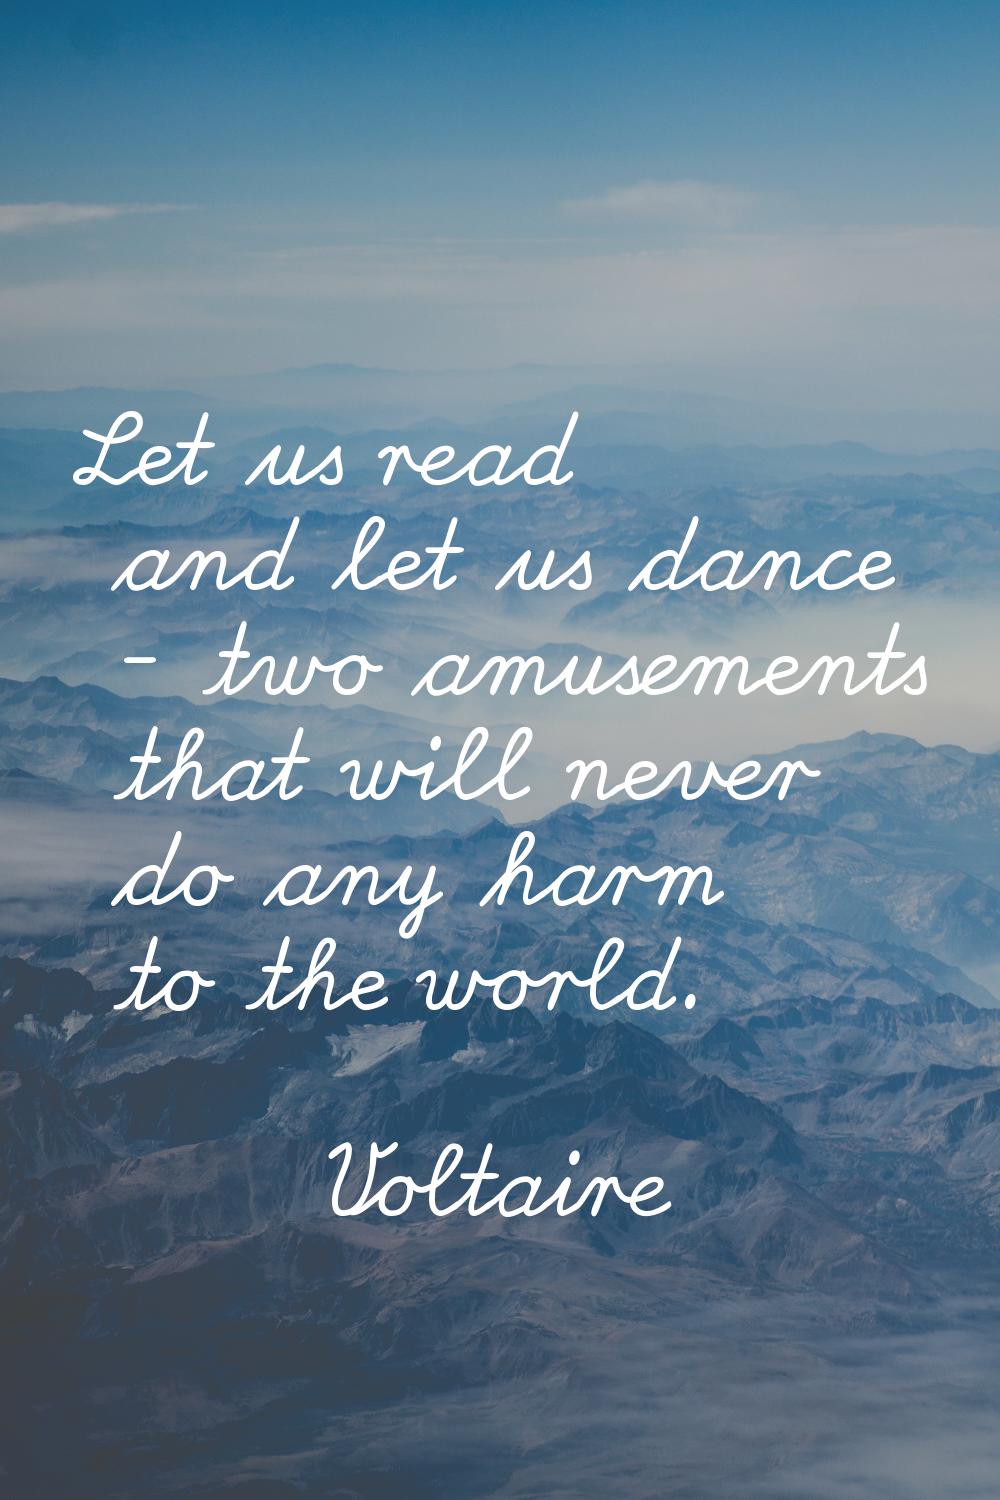 Let us read and let us dance - two amusements that will never do any harm to the world.